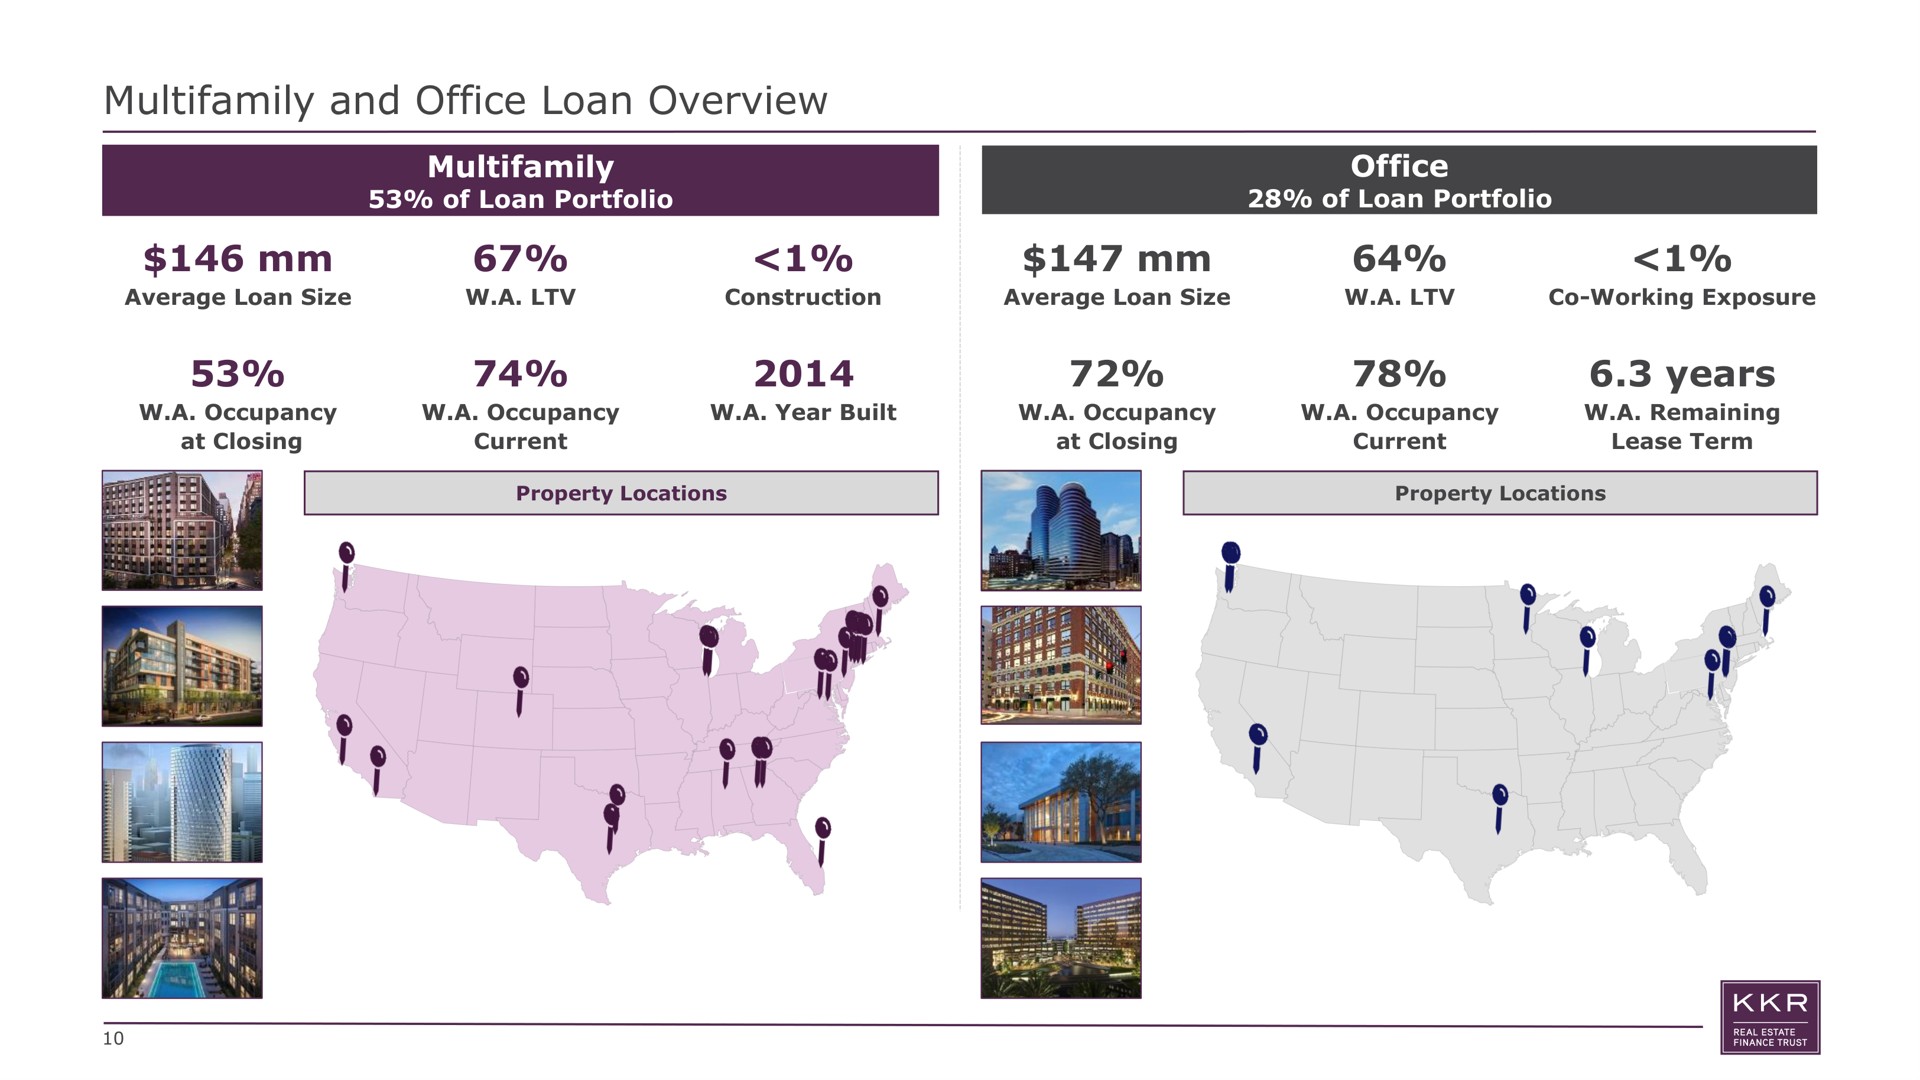 and office loan overview office years of portfolio of portfolio lease term at closing current current at closing | KKR Real Estate Finance Trust